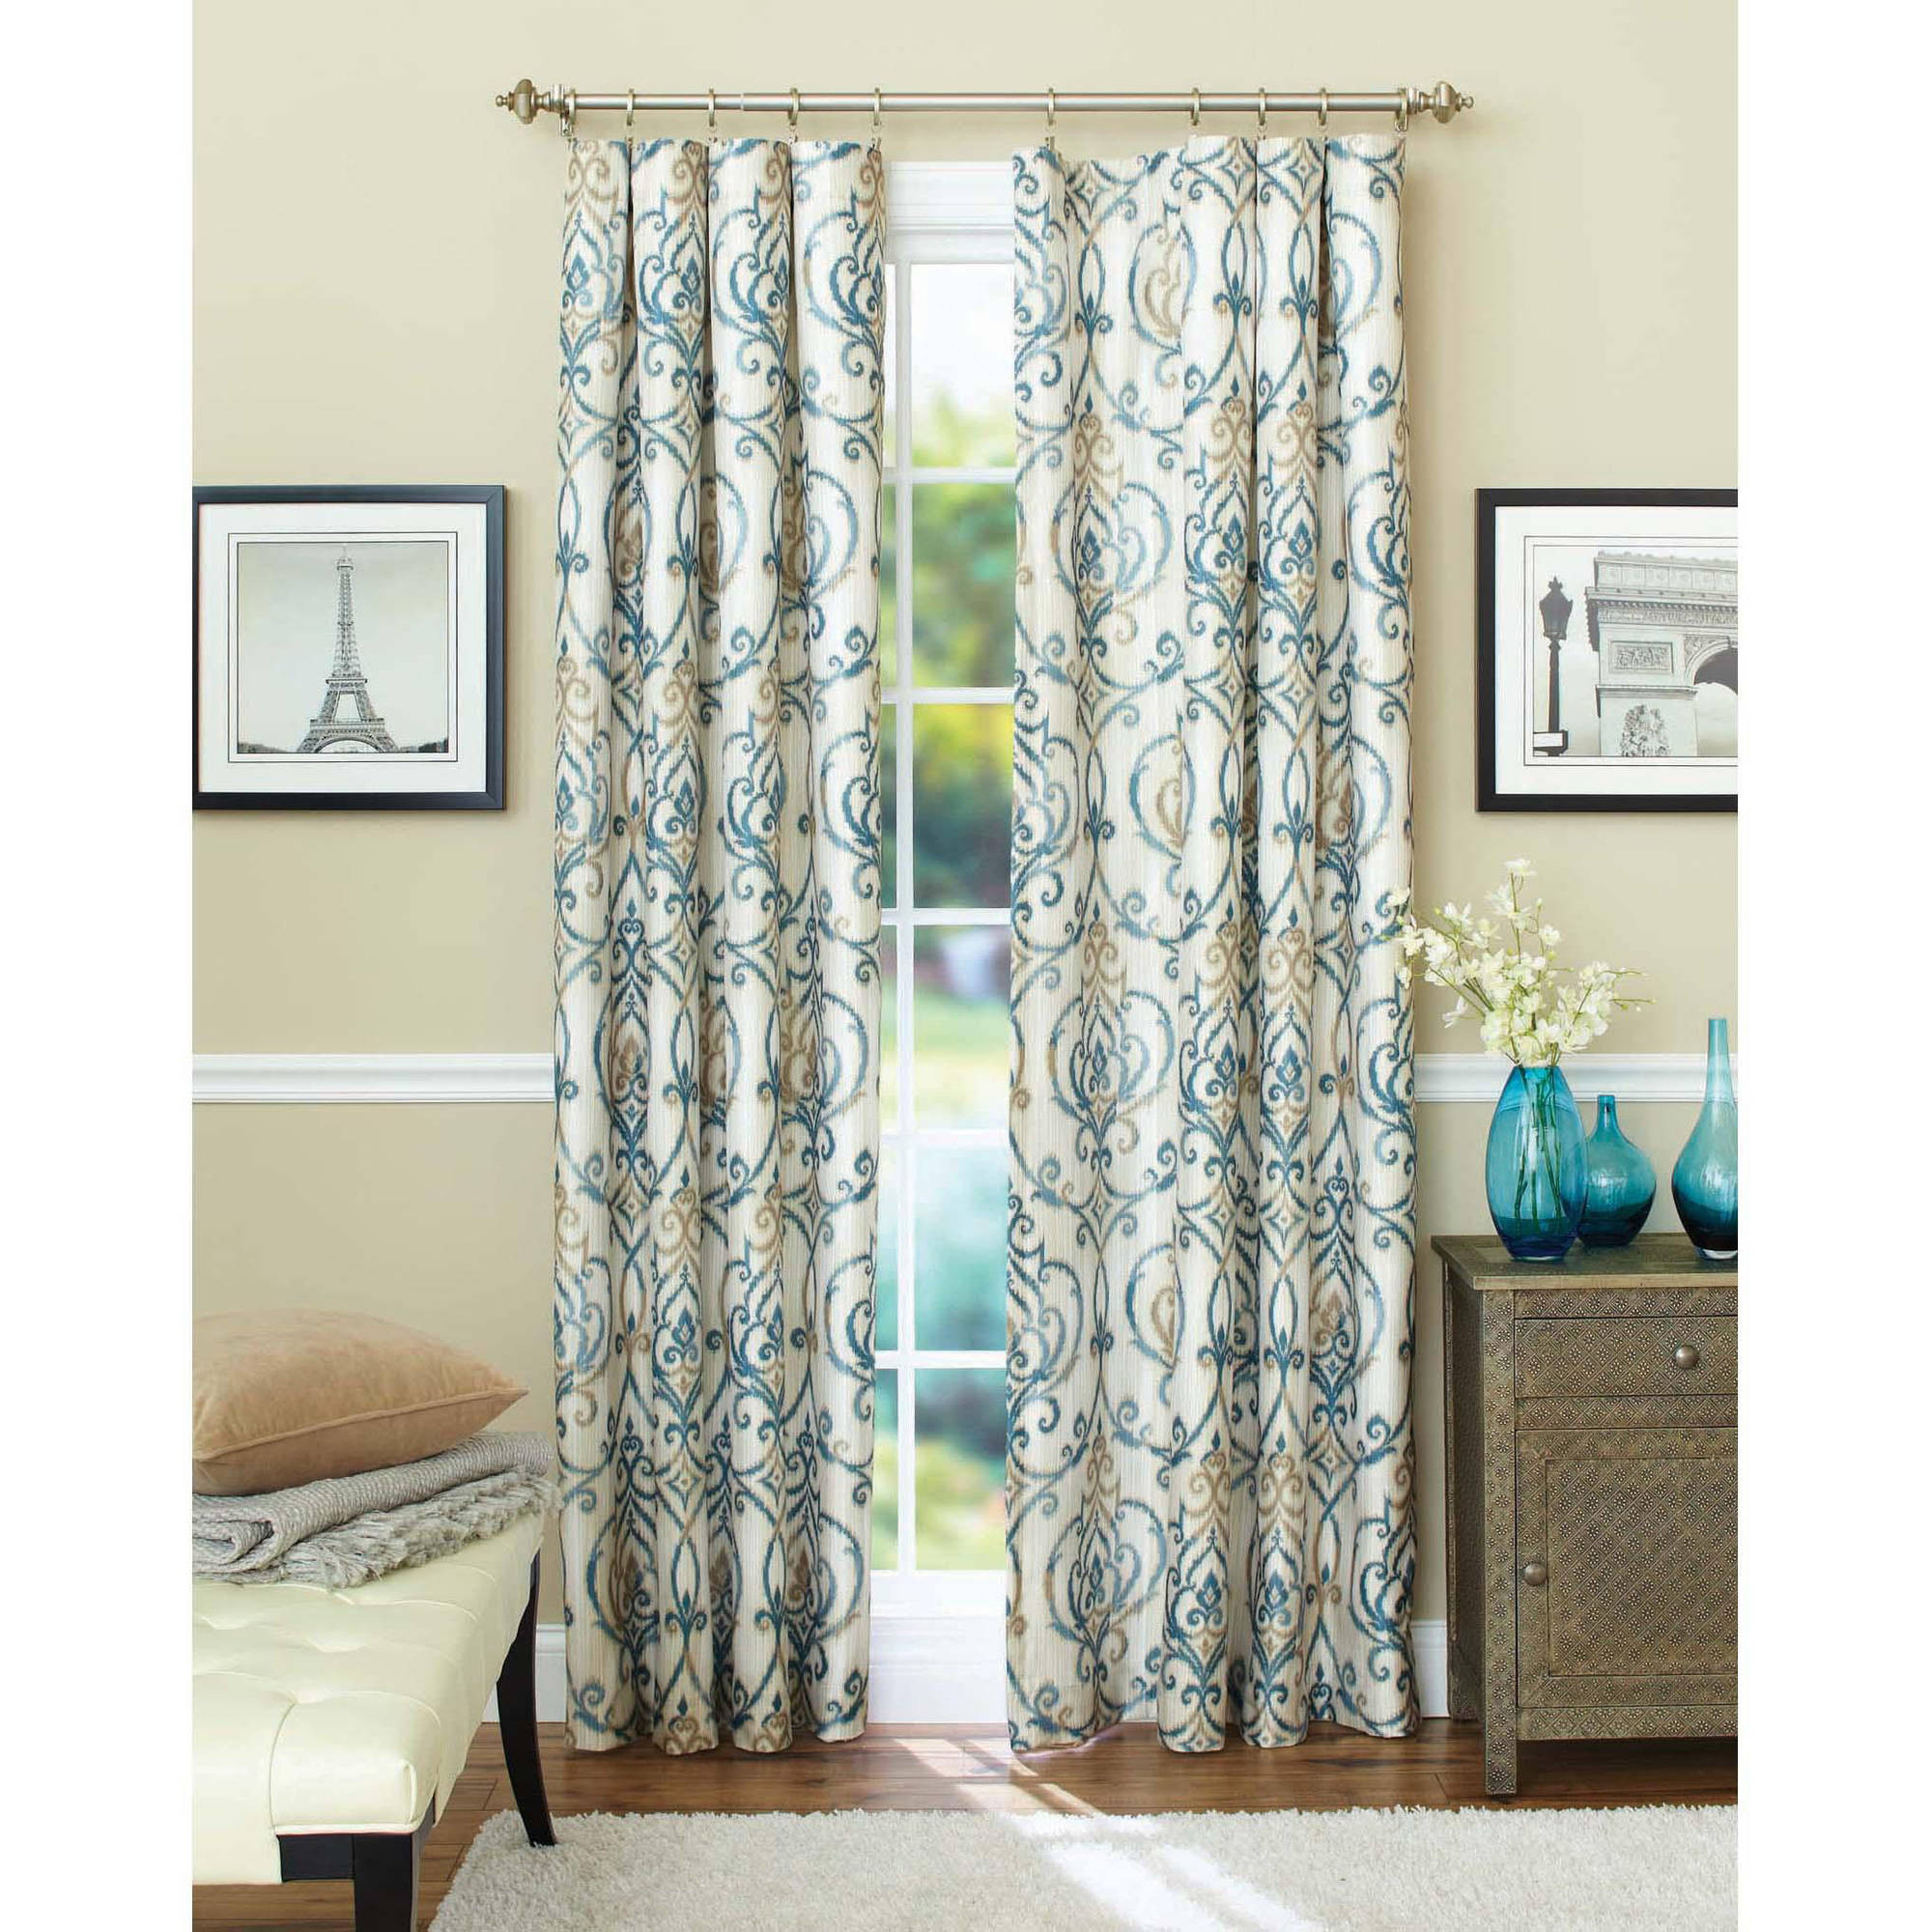 Walmart Kitchen Curtains Valances
 Curtain Add Fresh Style And Color To Your Home With